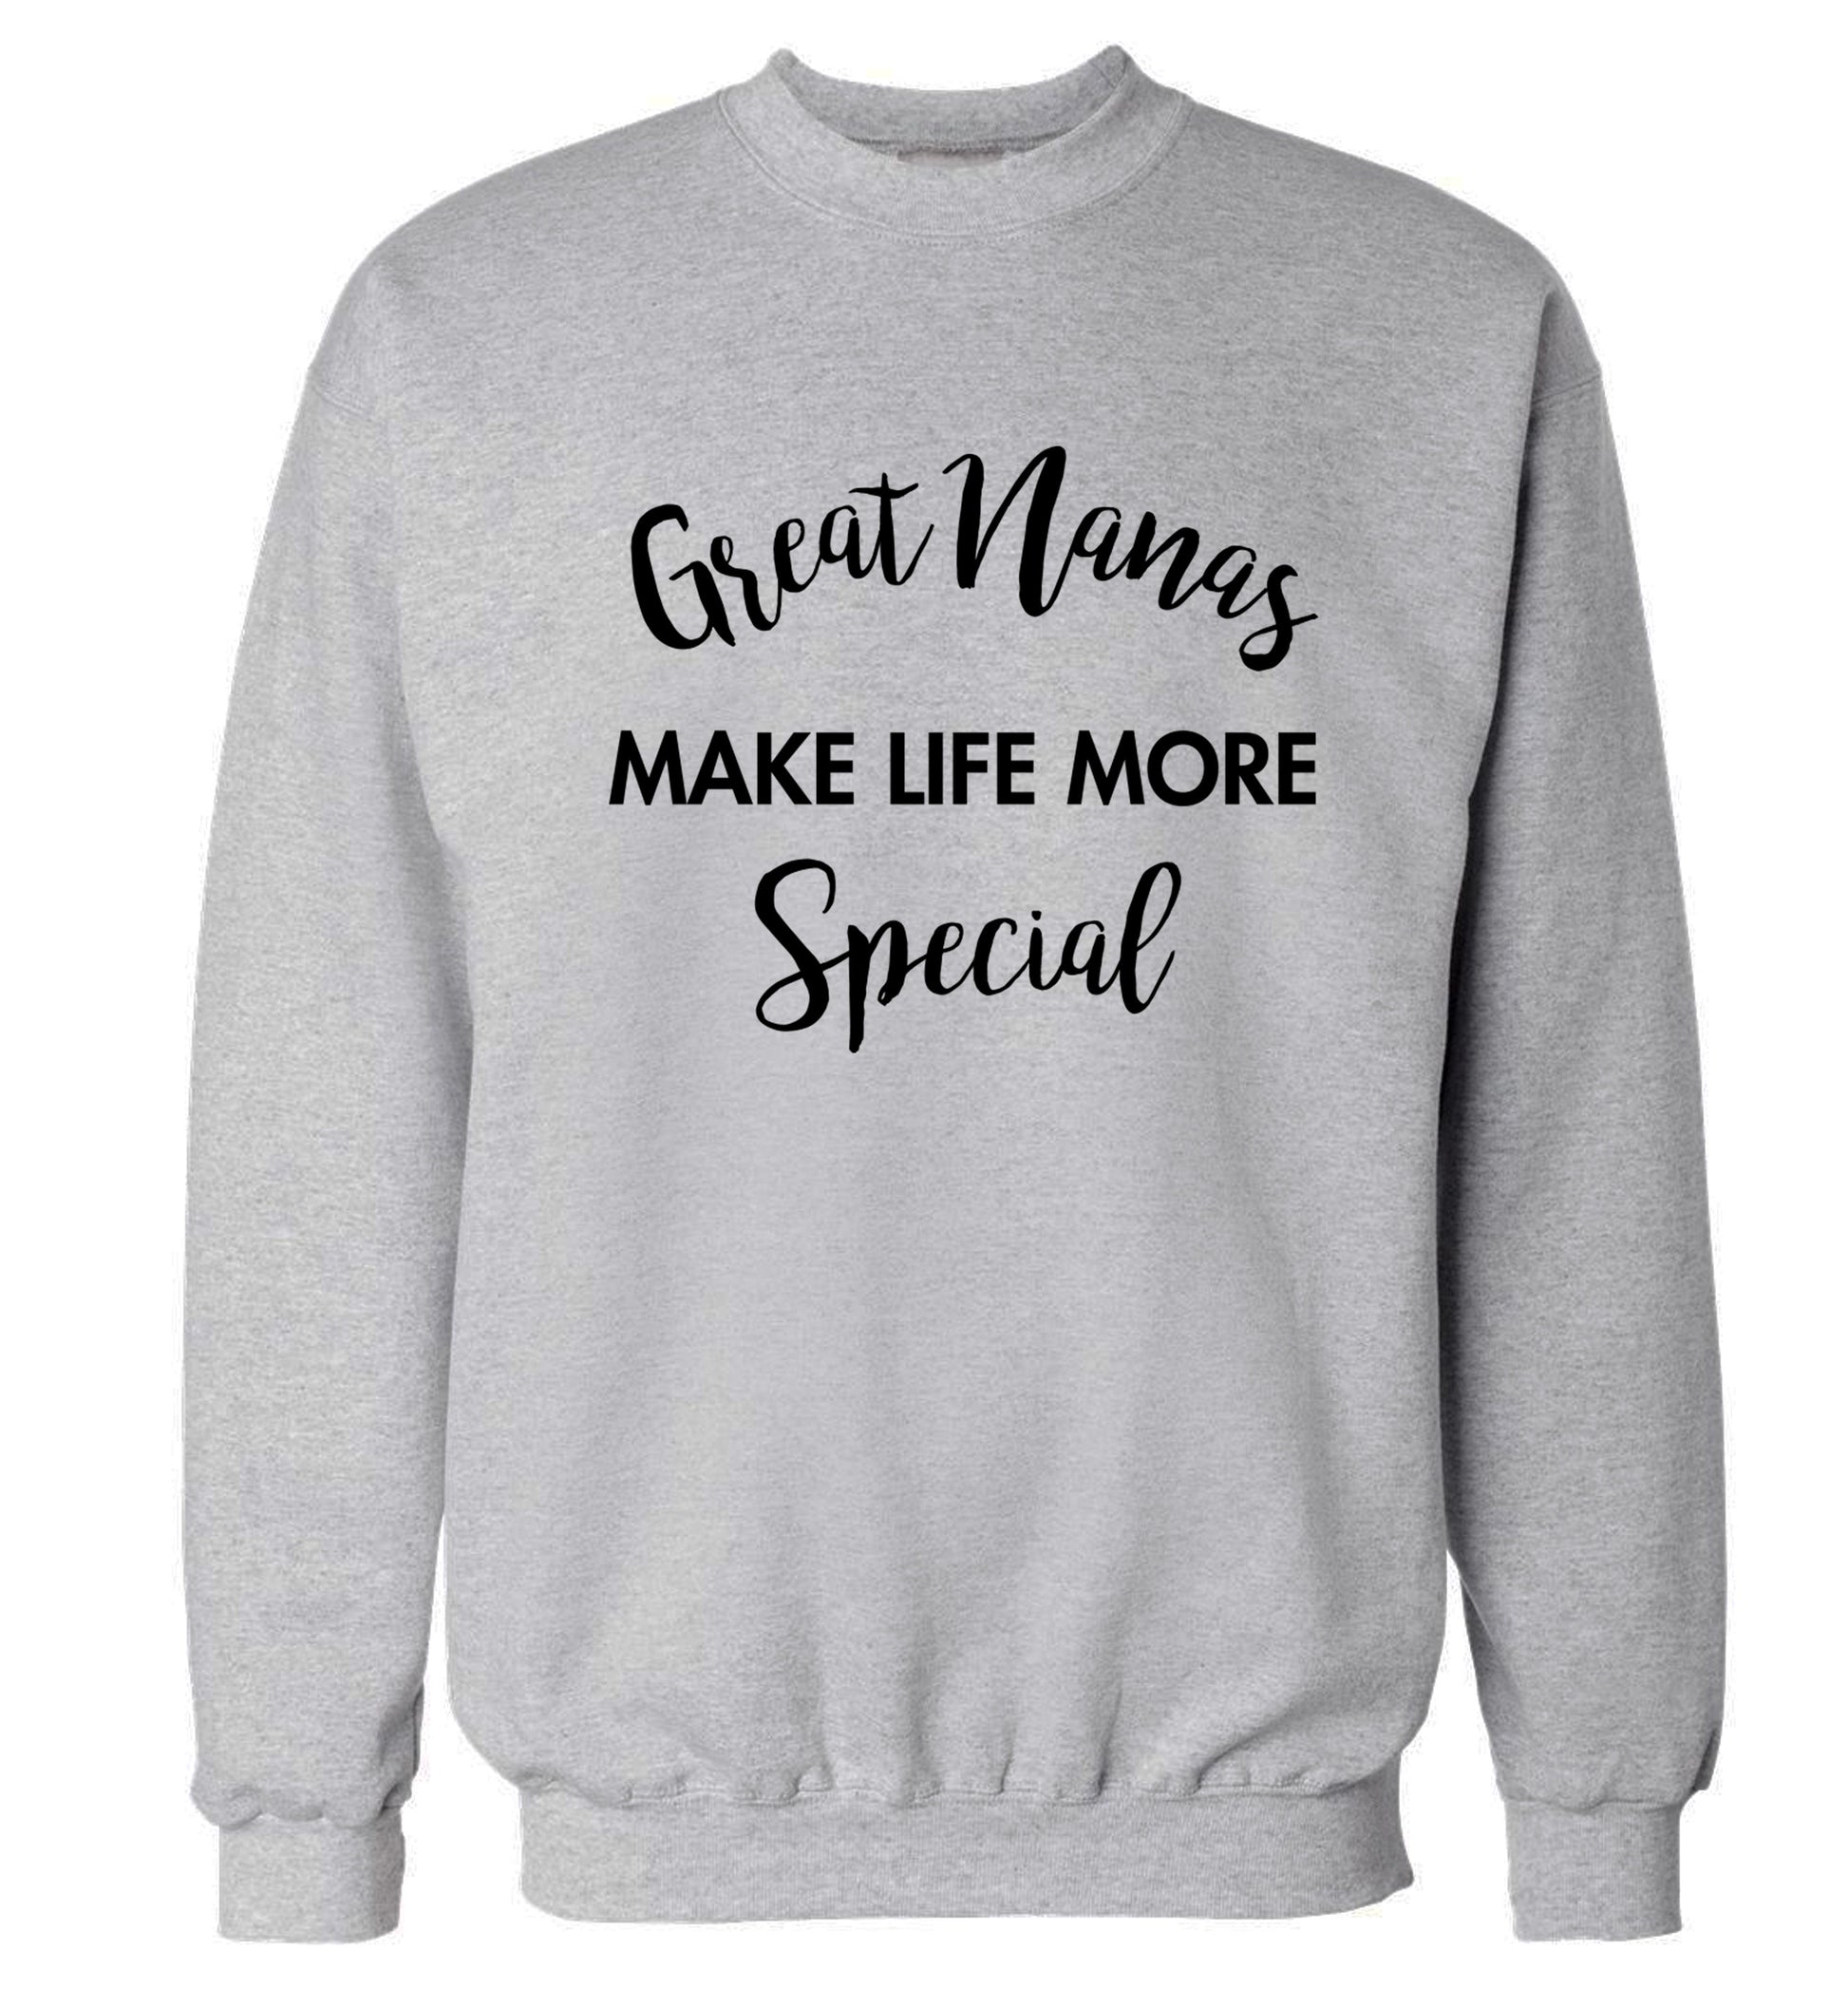 Great nanas make life more special Adult's unisex grey Sweater 2XL